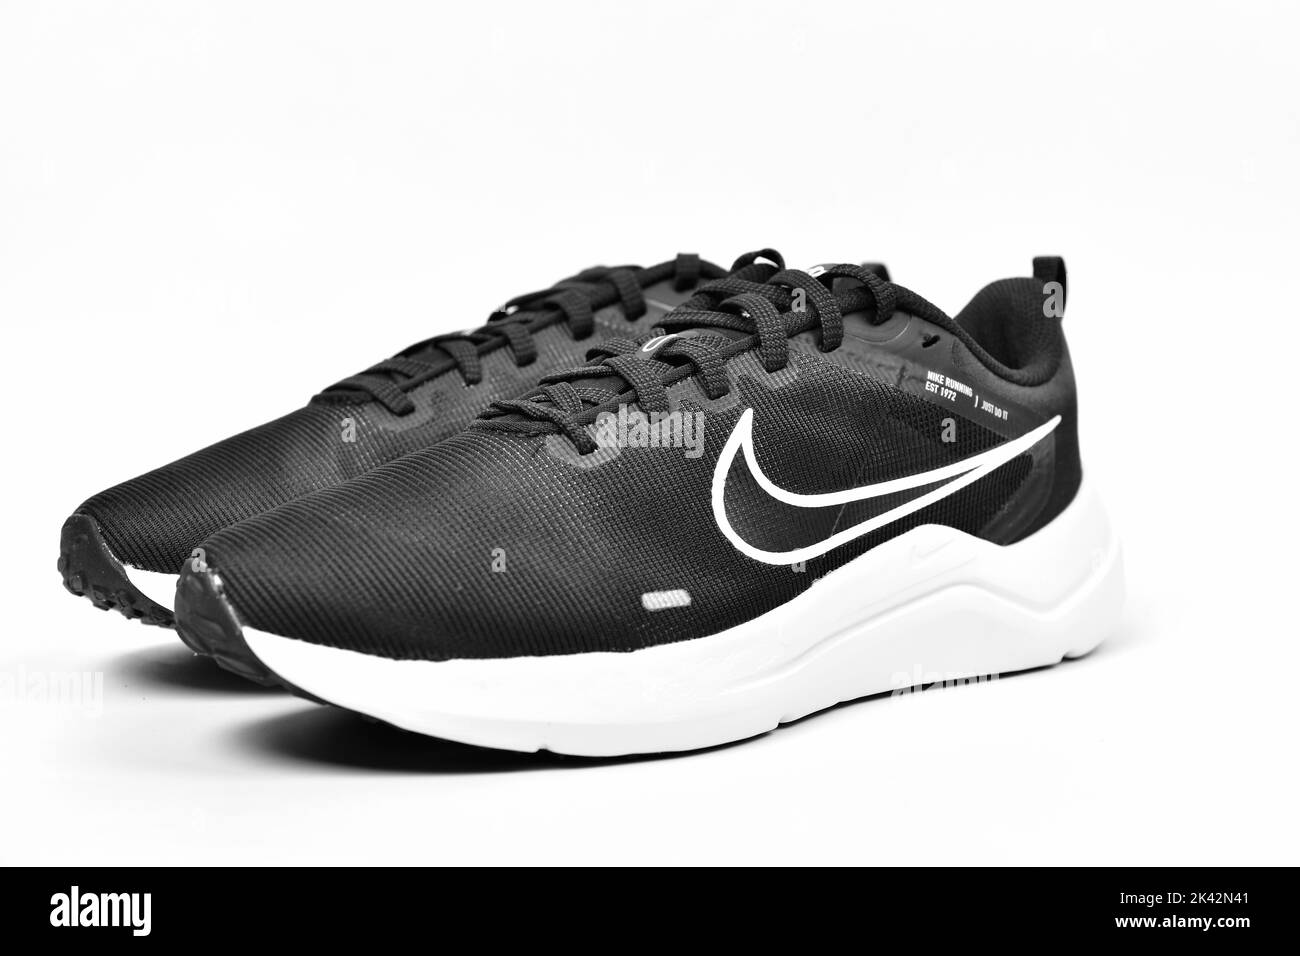 Nike running shoes Black and White Stock Photos & Images - Alamy